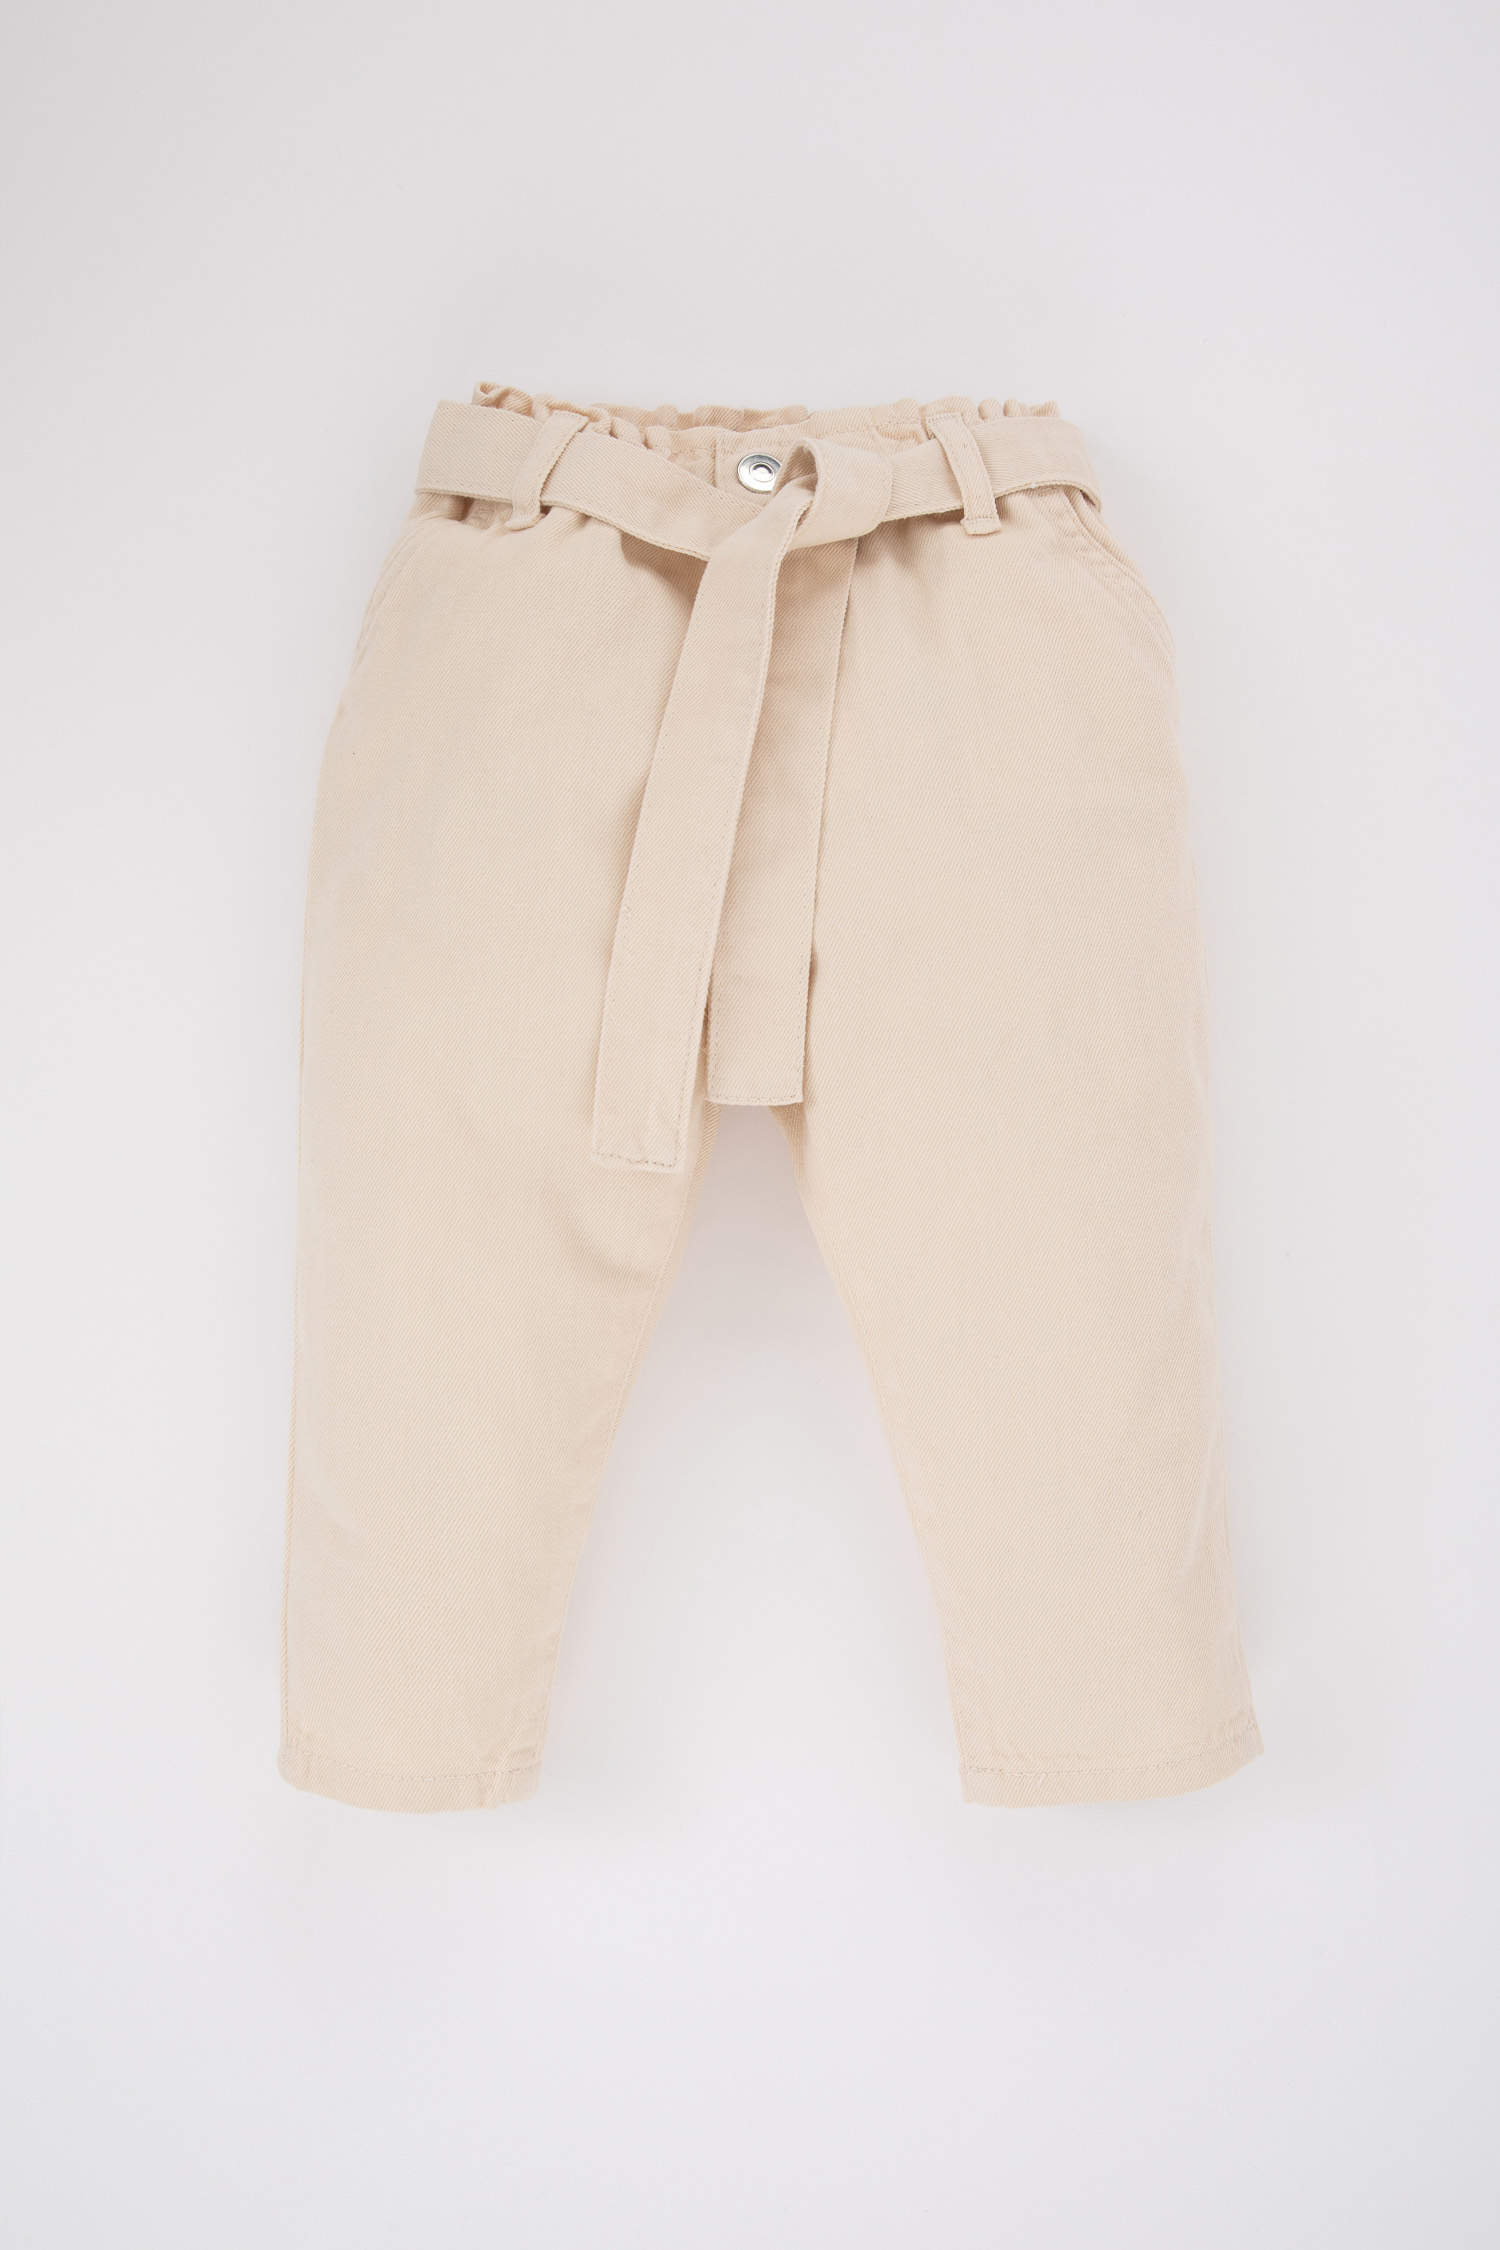 Buy Baby Girls Trousers of Organic Cotton Online  Latest Baby Girl Trousers  at Best Prices in India  World of Born